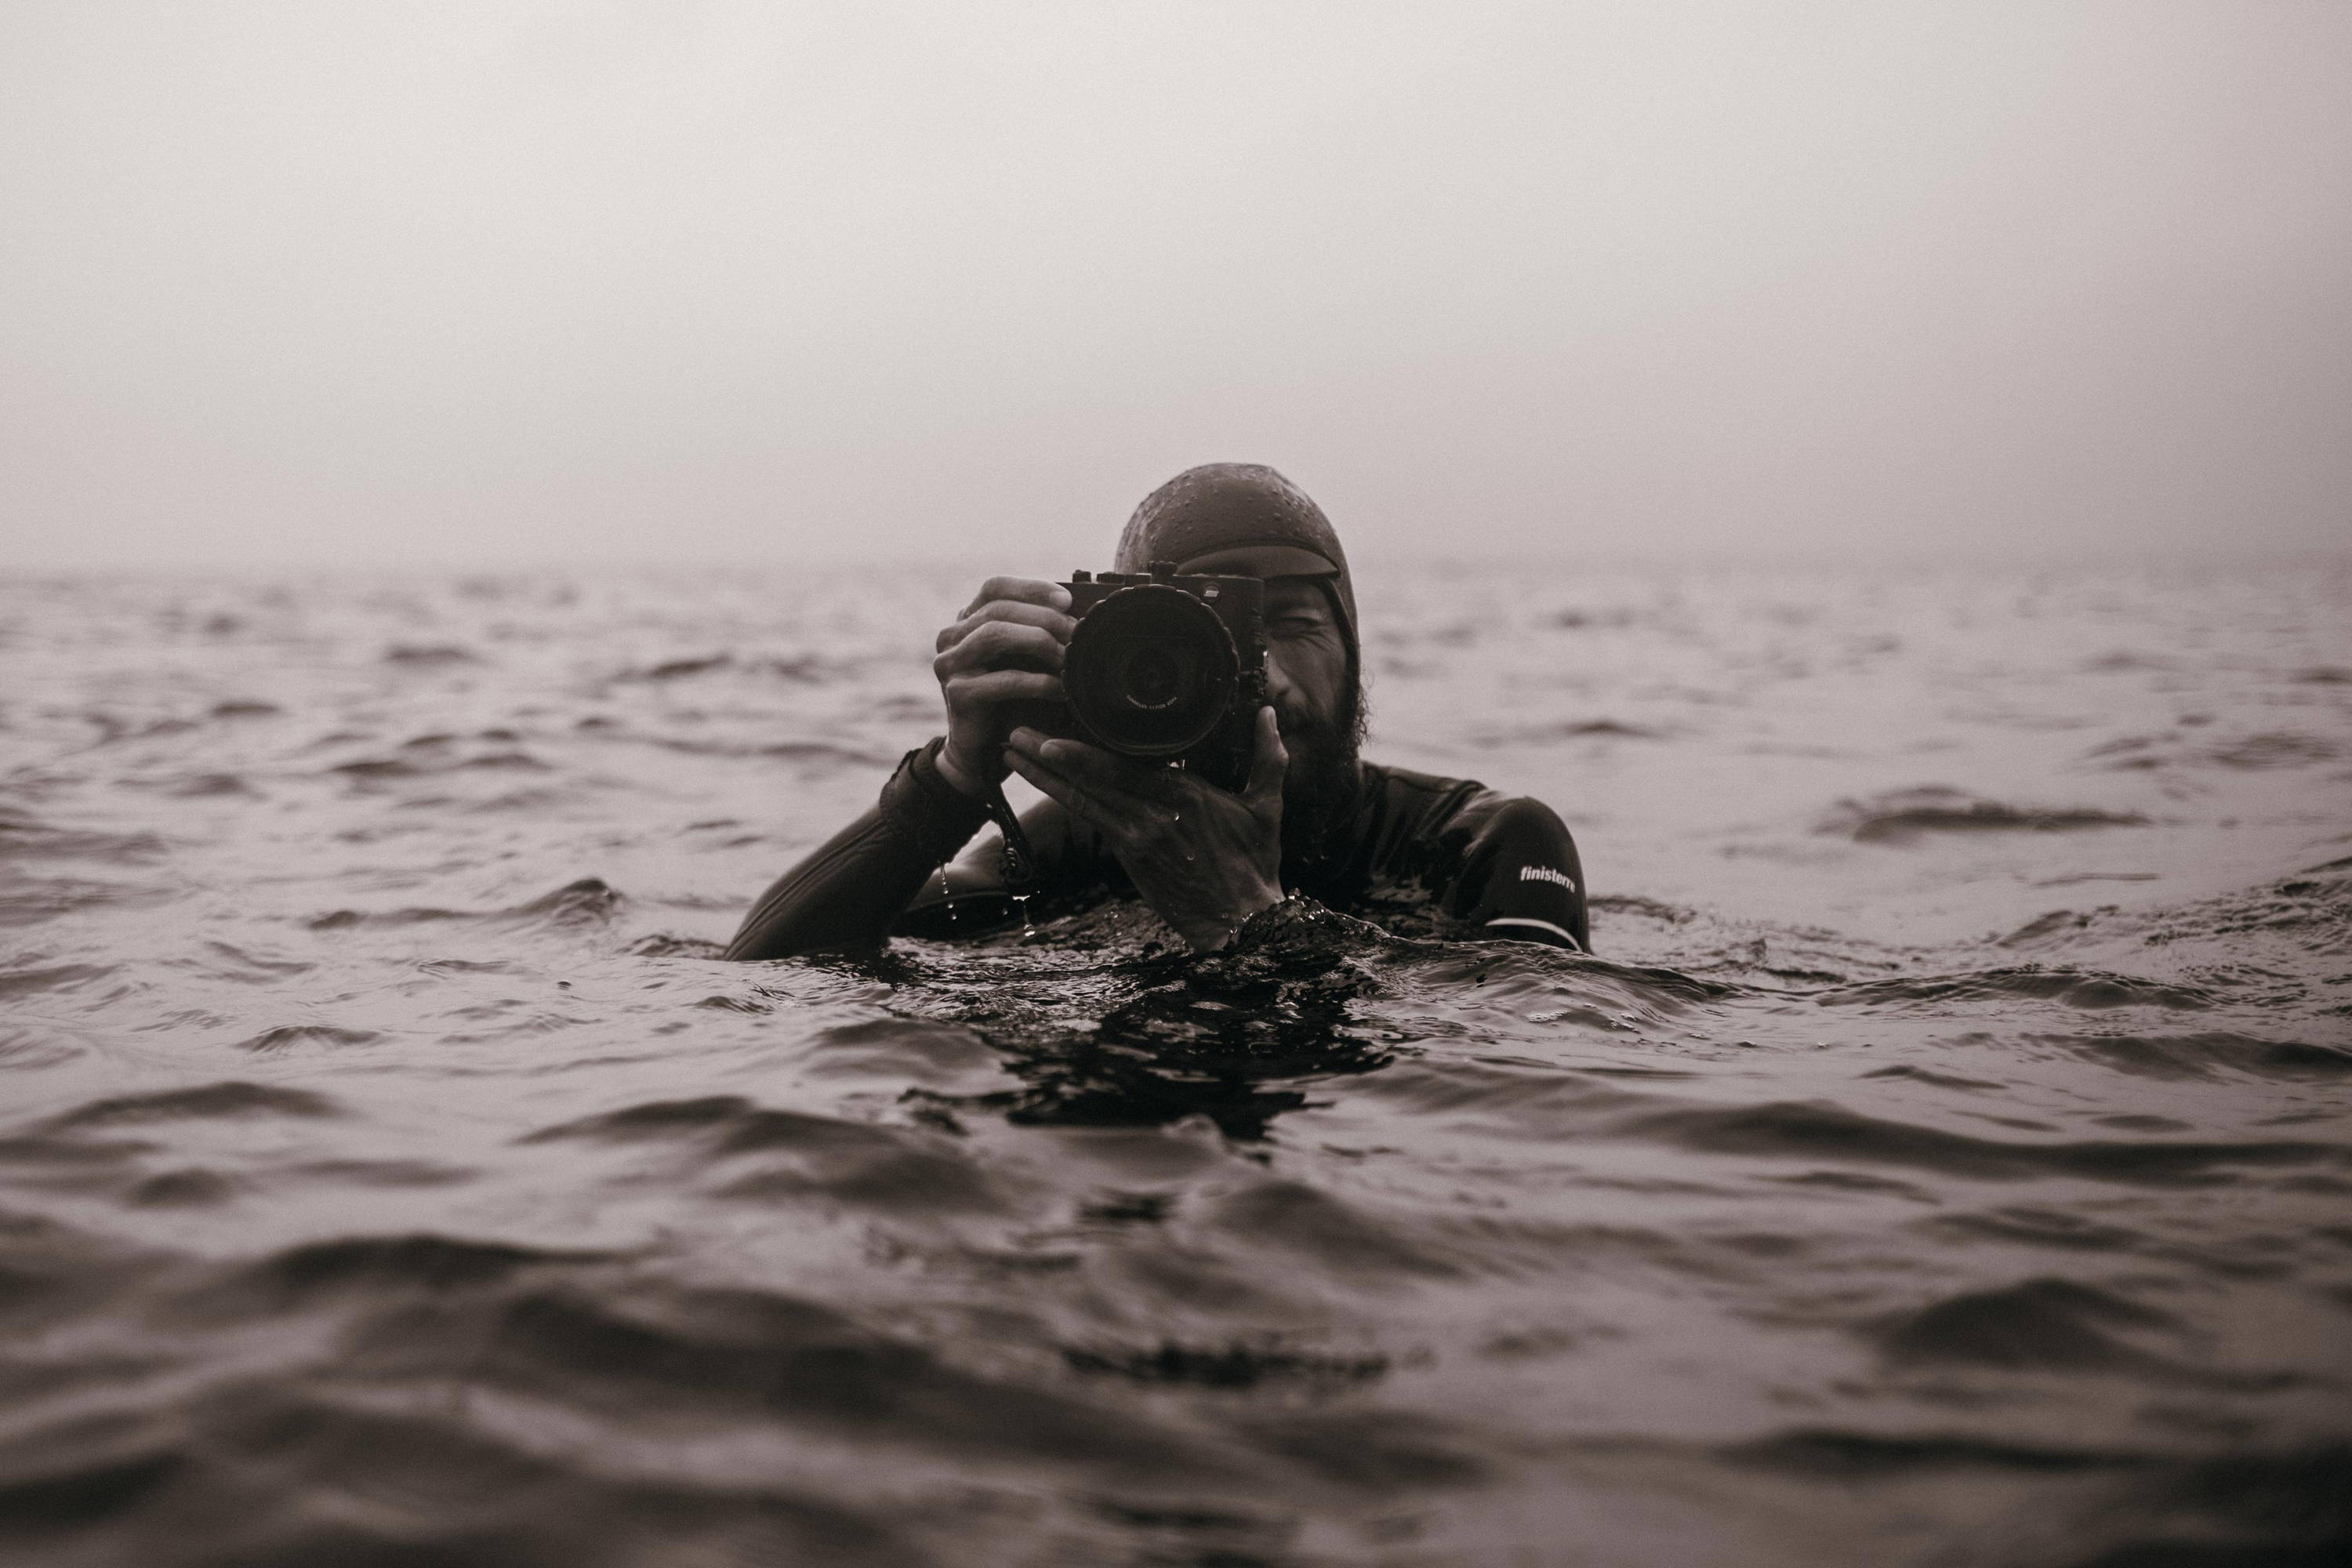 Black and white image of Nick Pumphrey shooting in the water